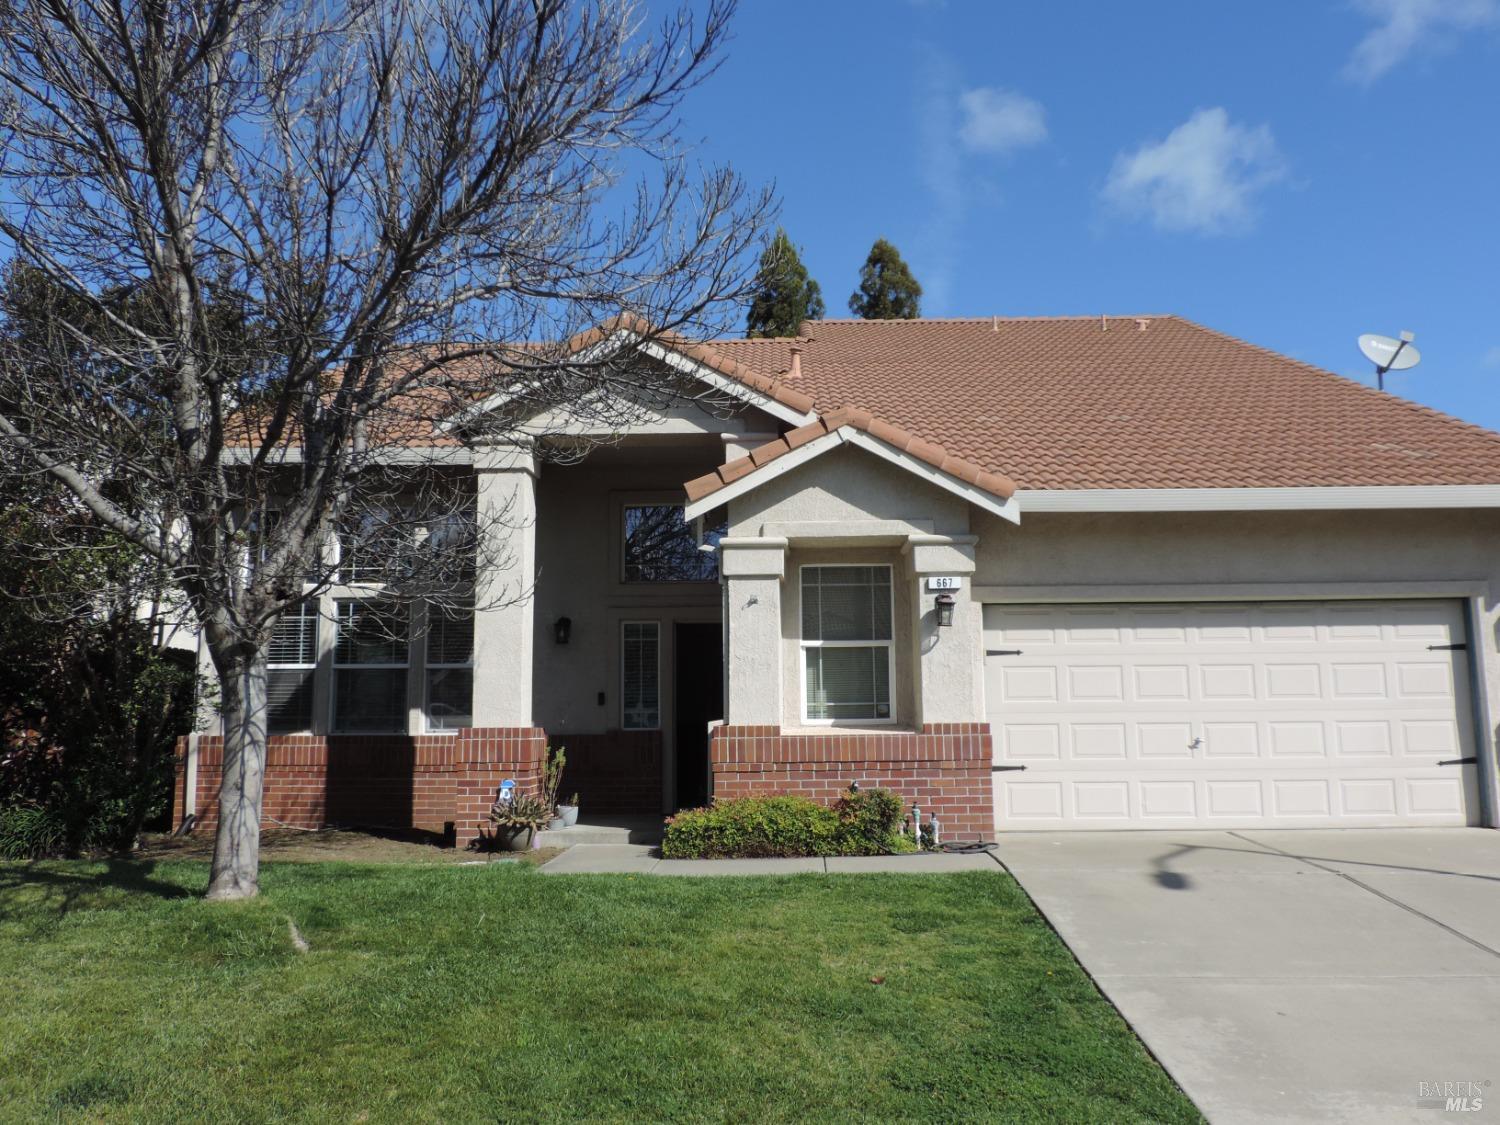 Wonderful Browns Valley home in Vacaville California. This area offers parks, transportation, easy a